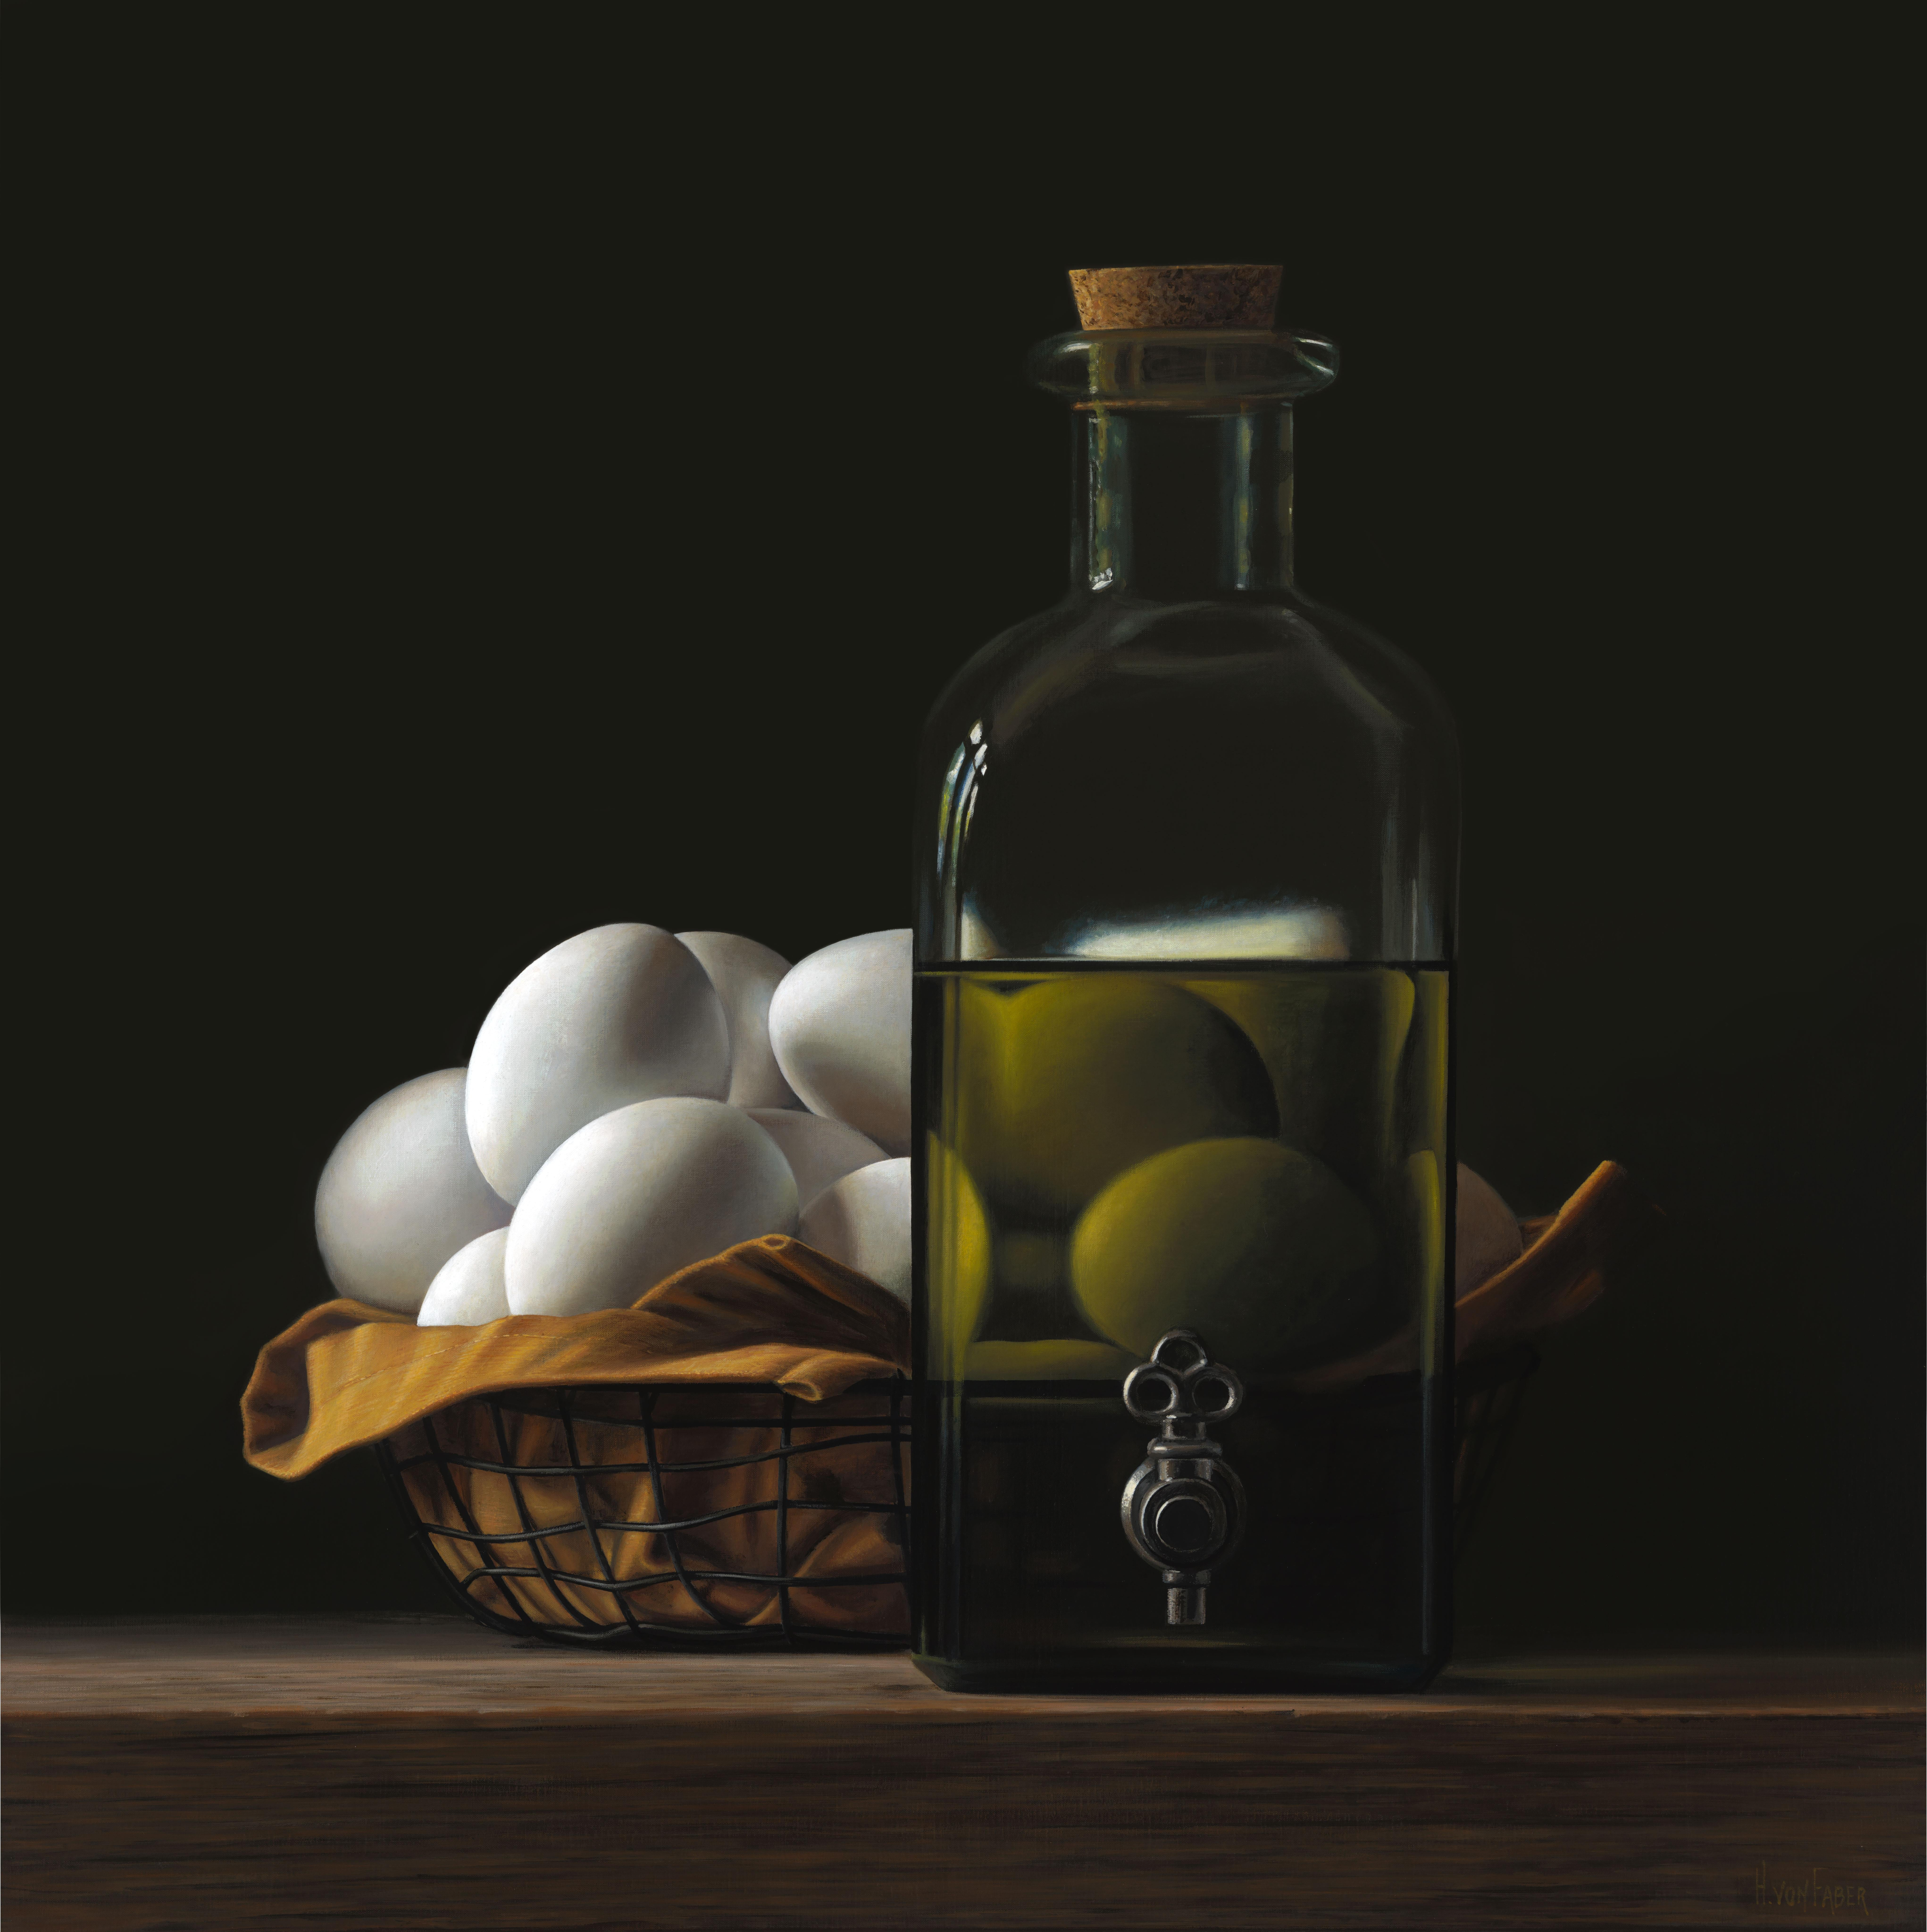 Bottle of Oil with Eggs- 21st Century Contemporary Still-life Painting with Eggs